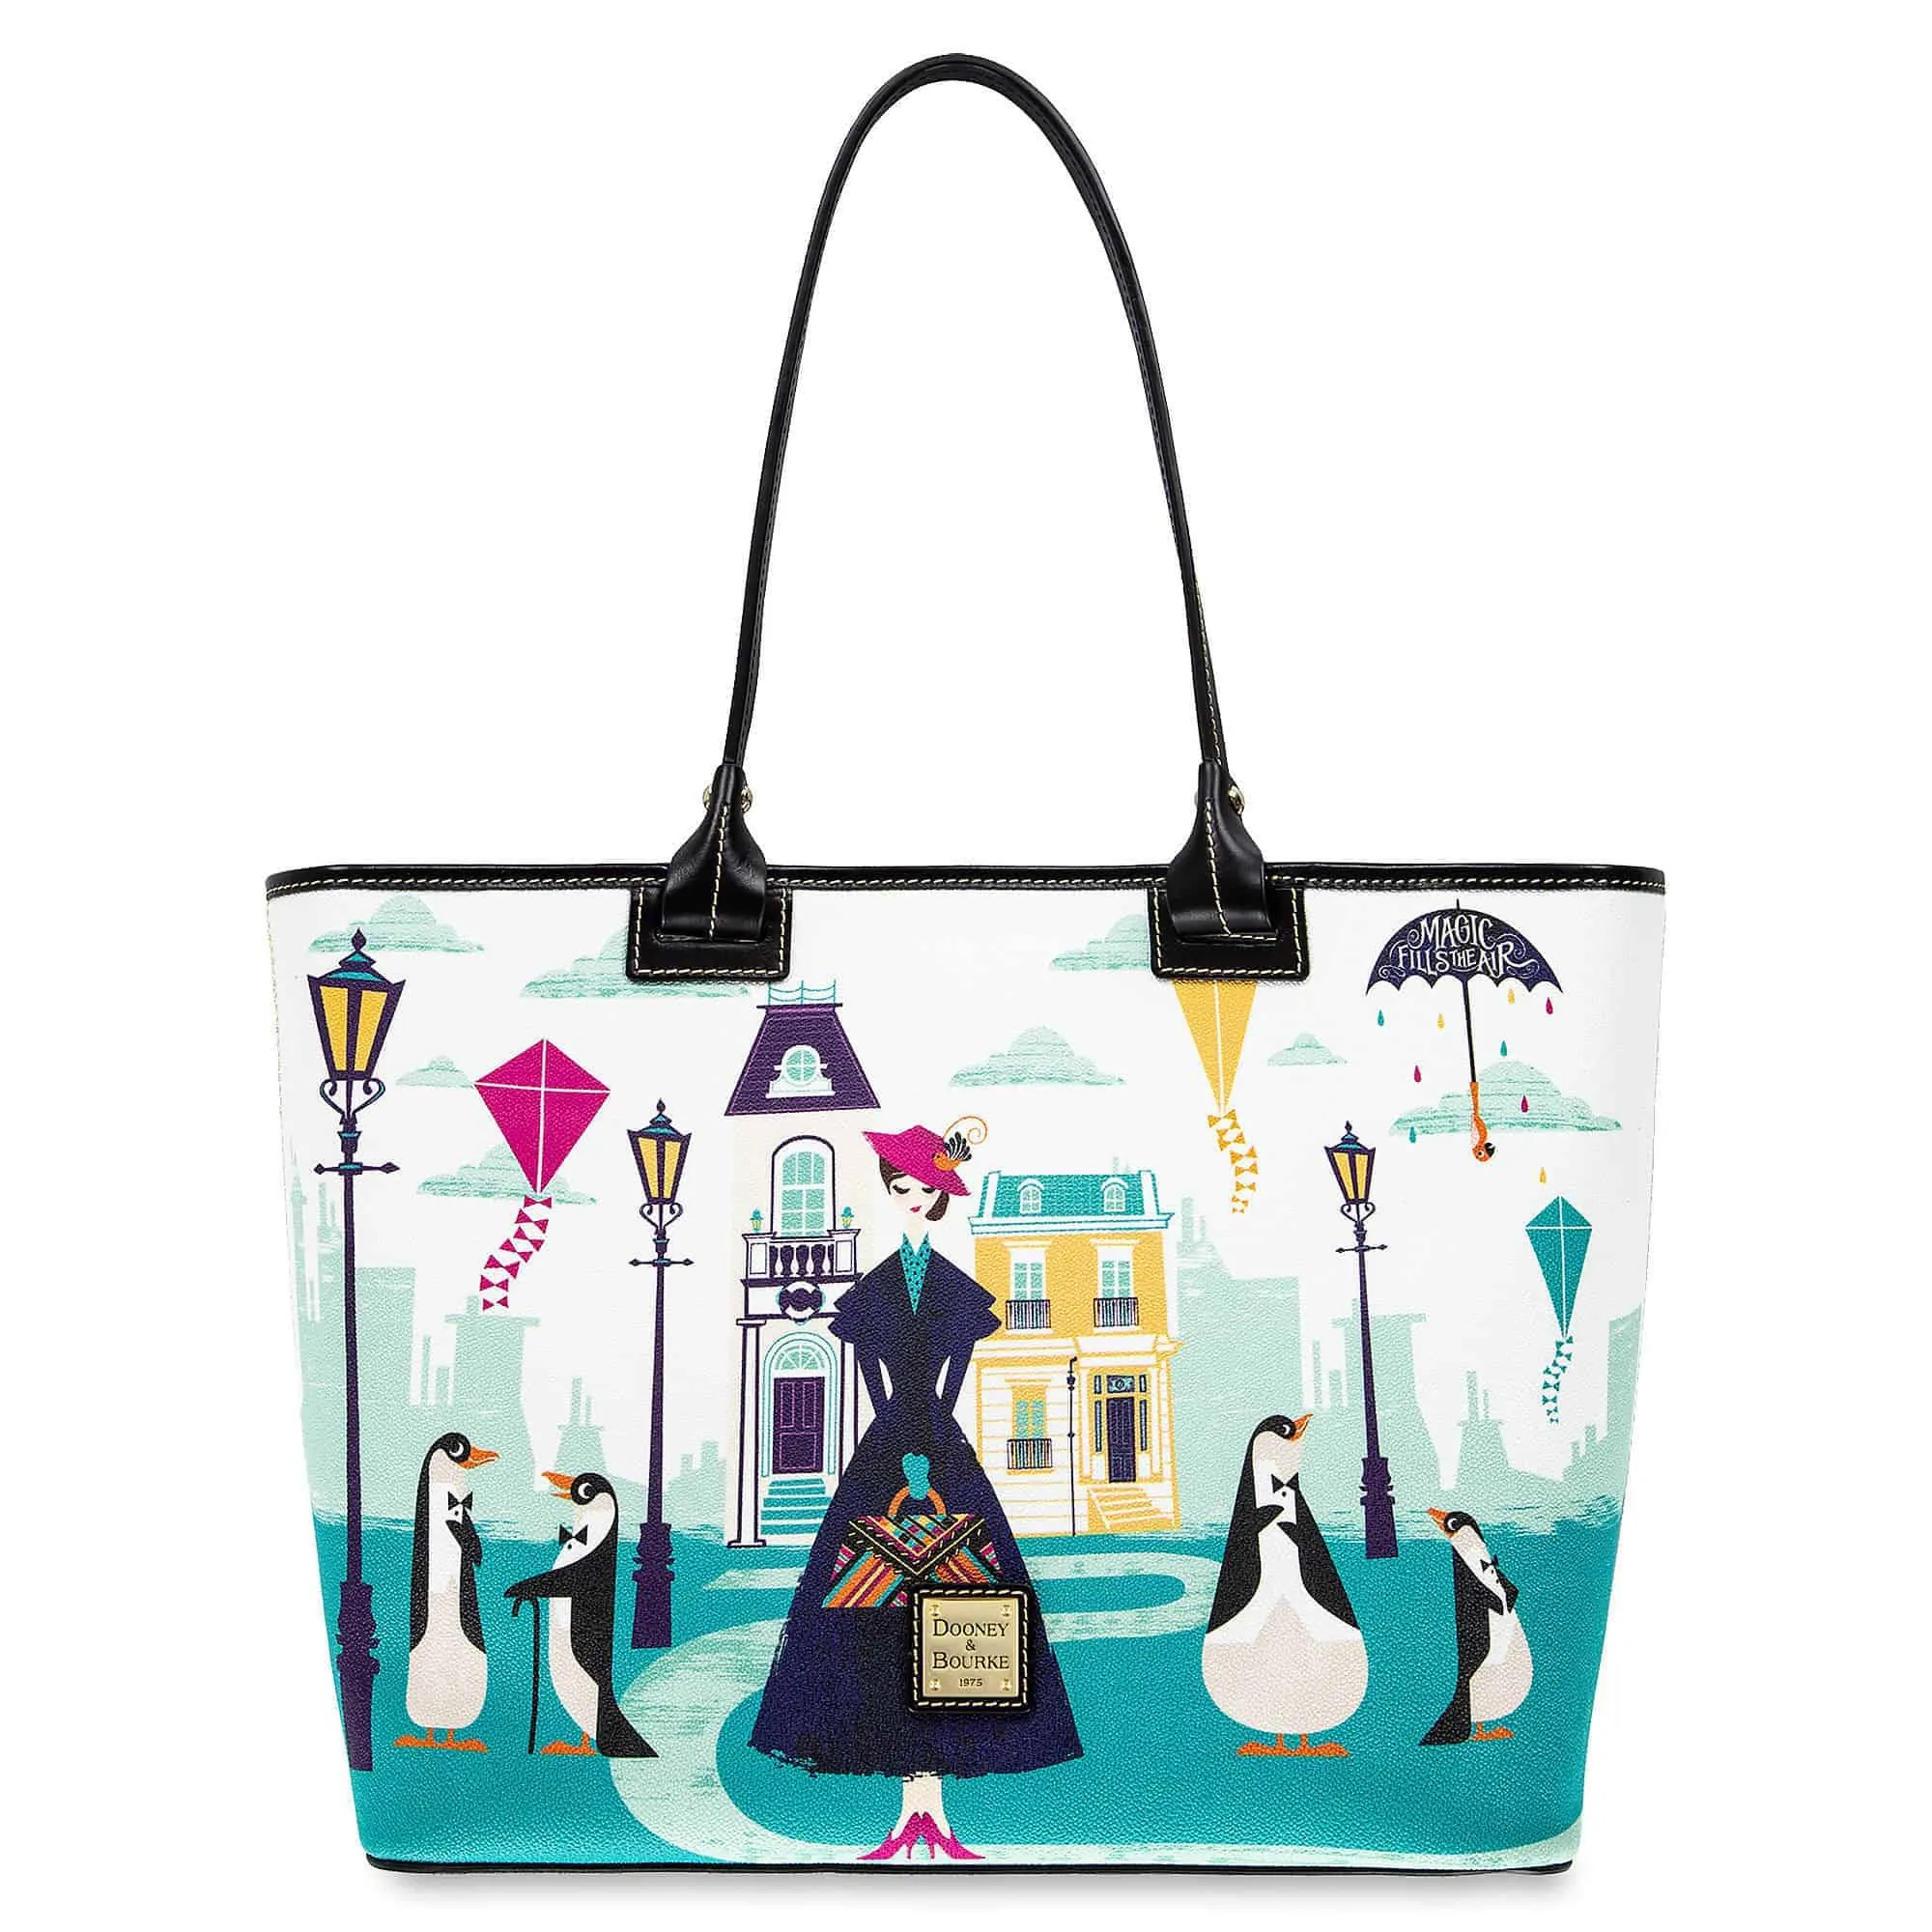 Mary Poppins Returns Tote